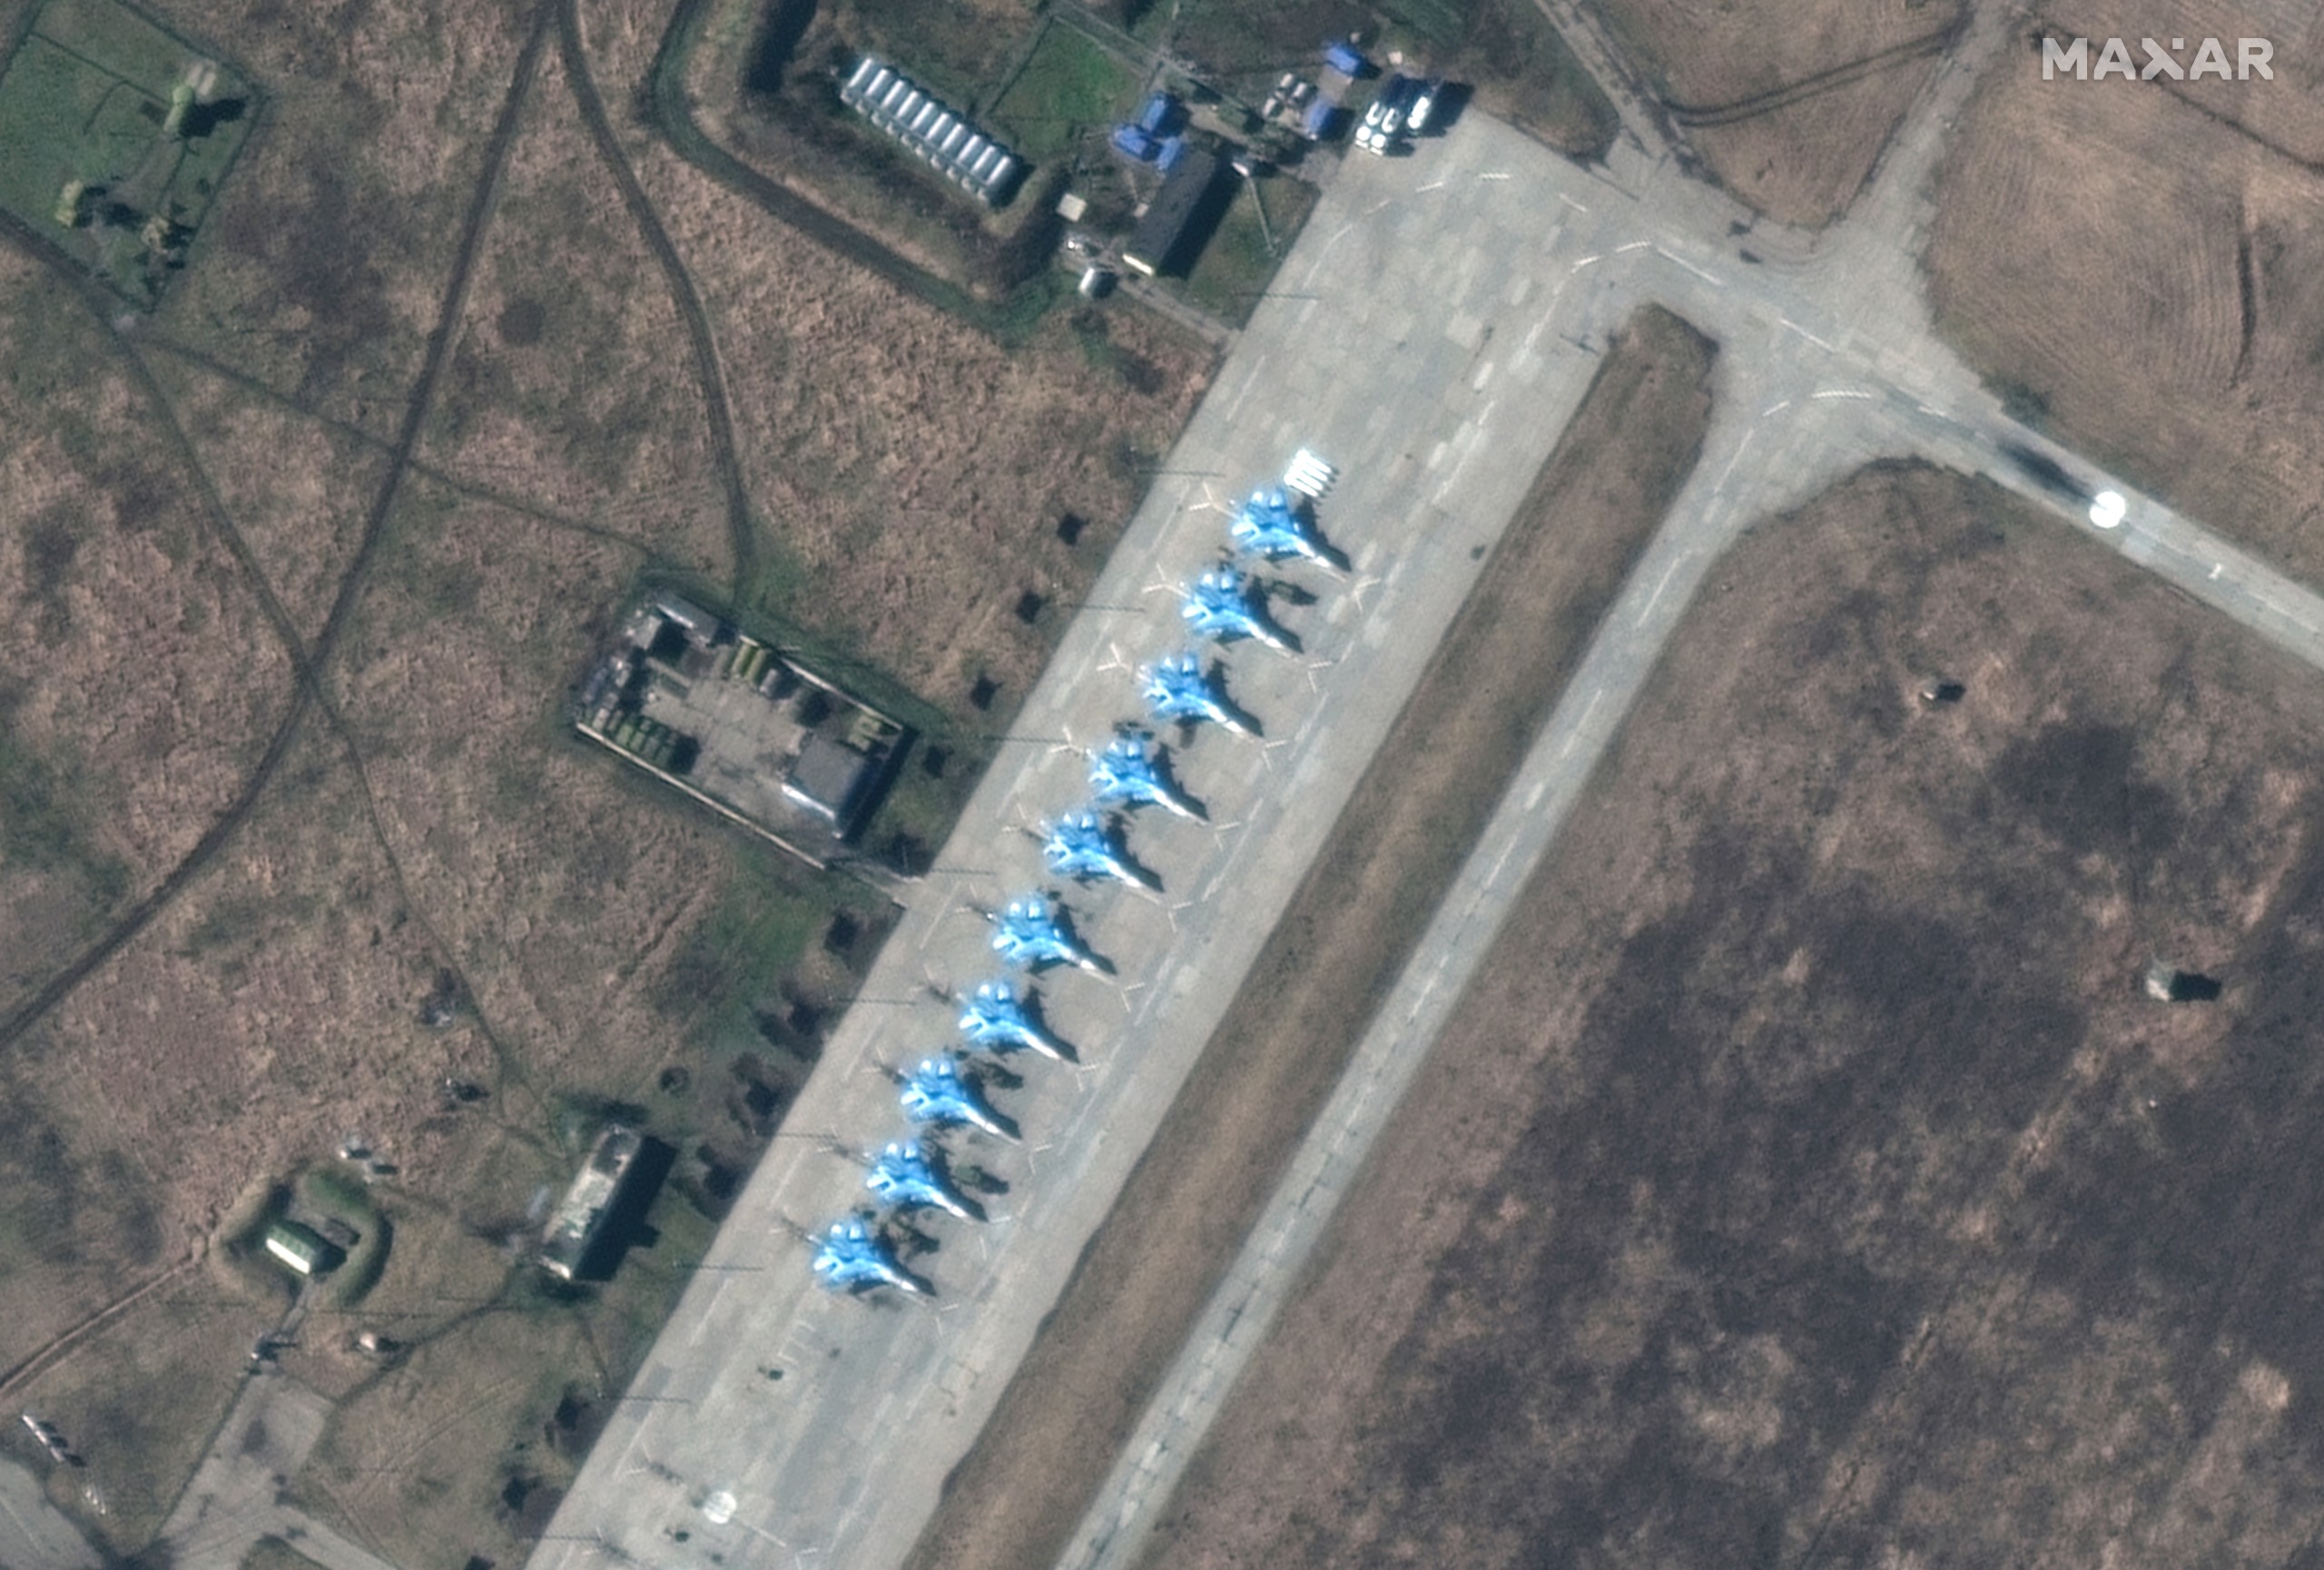 epa09757167 A handout satellite image made available by Maxar Technologies shows a closer view of Sukhoi Su-34 fighters deployment in Primorsko-Akhtarsk airbase, in Krasnodar Krai, Russia, 13 February 2022 (Issued 14 February 2022).  EPA/MAXAR TECHNOLOGIES HANDOUT -- MANDATORY CREDIT: SATELLITE IMAGE 2022 MAXAR TECHNOLOGIES -- THE WATERMARK MAY NOT BE REMOVED/CROPPED -- HANDOUT EDITORIAL USE ONLY/NO SALES